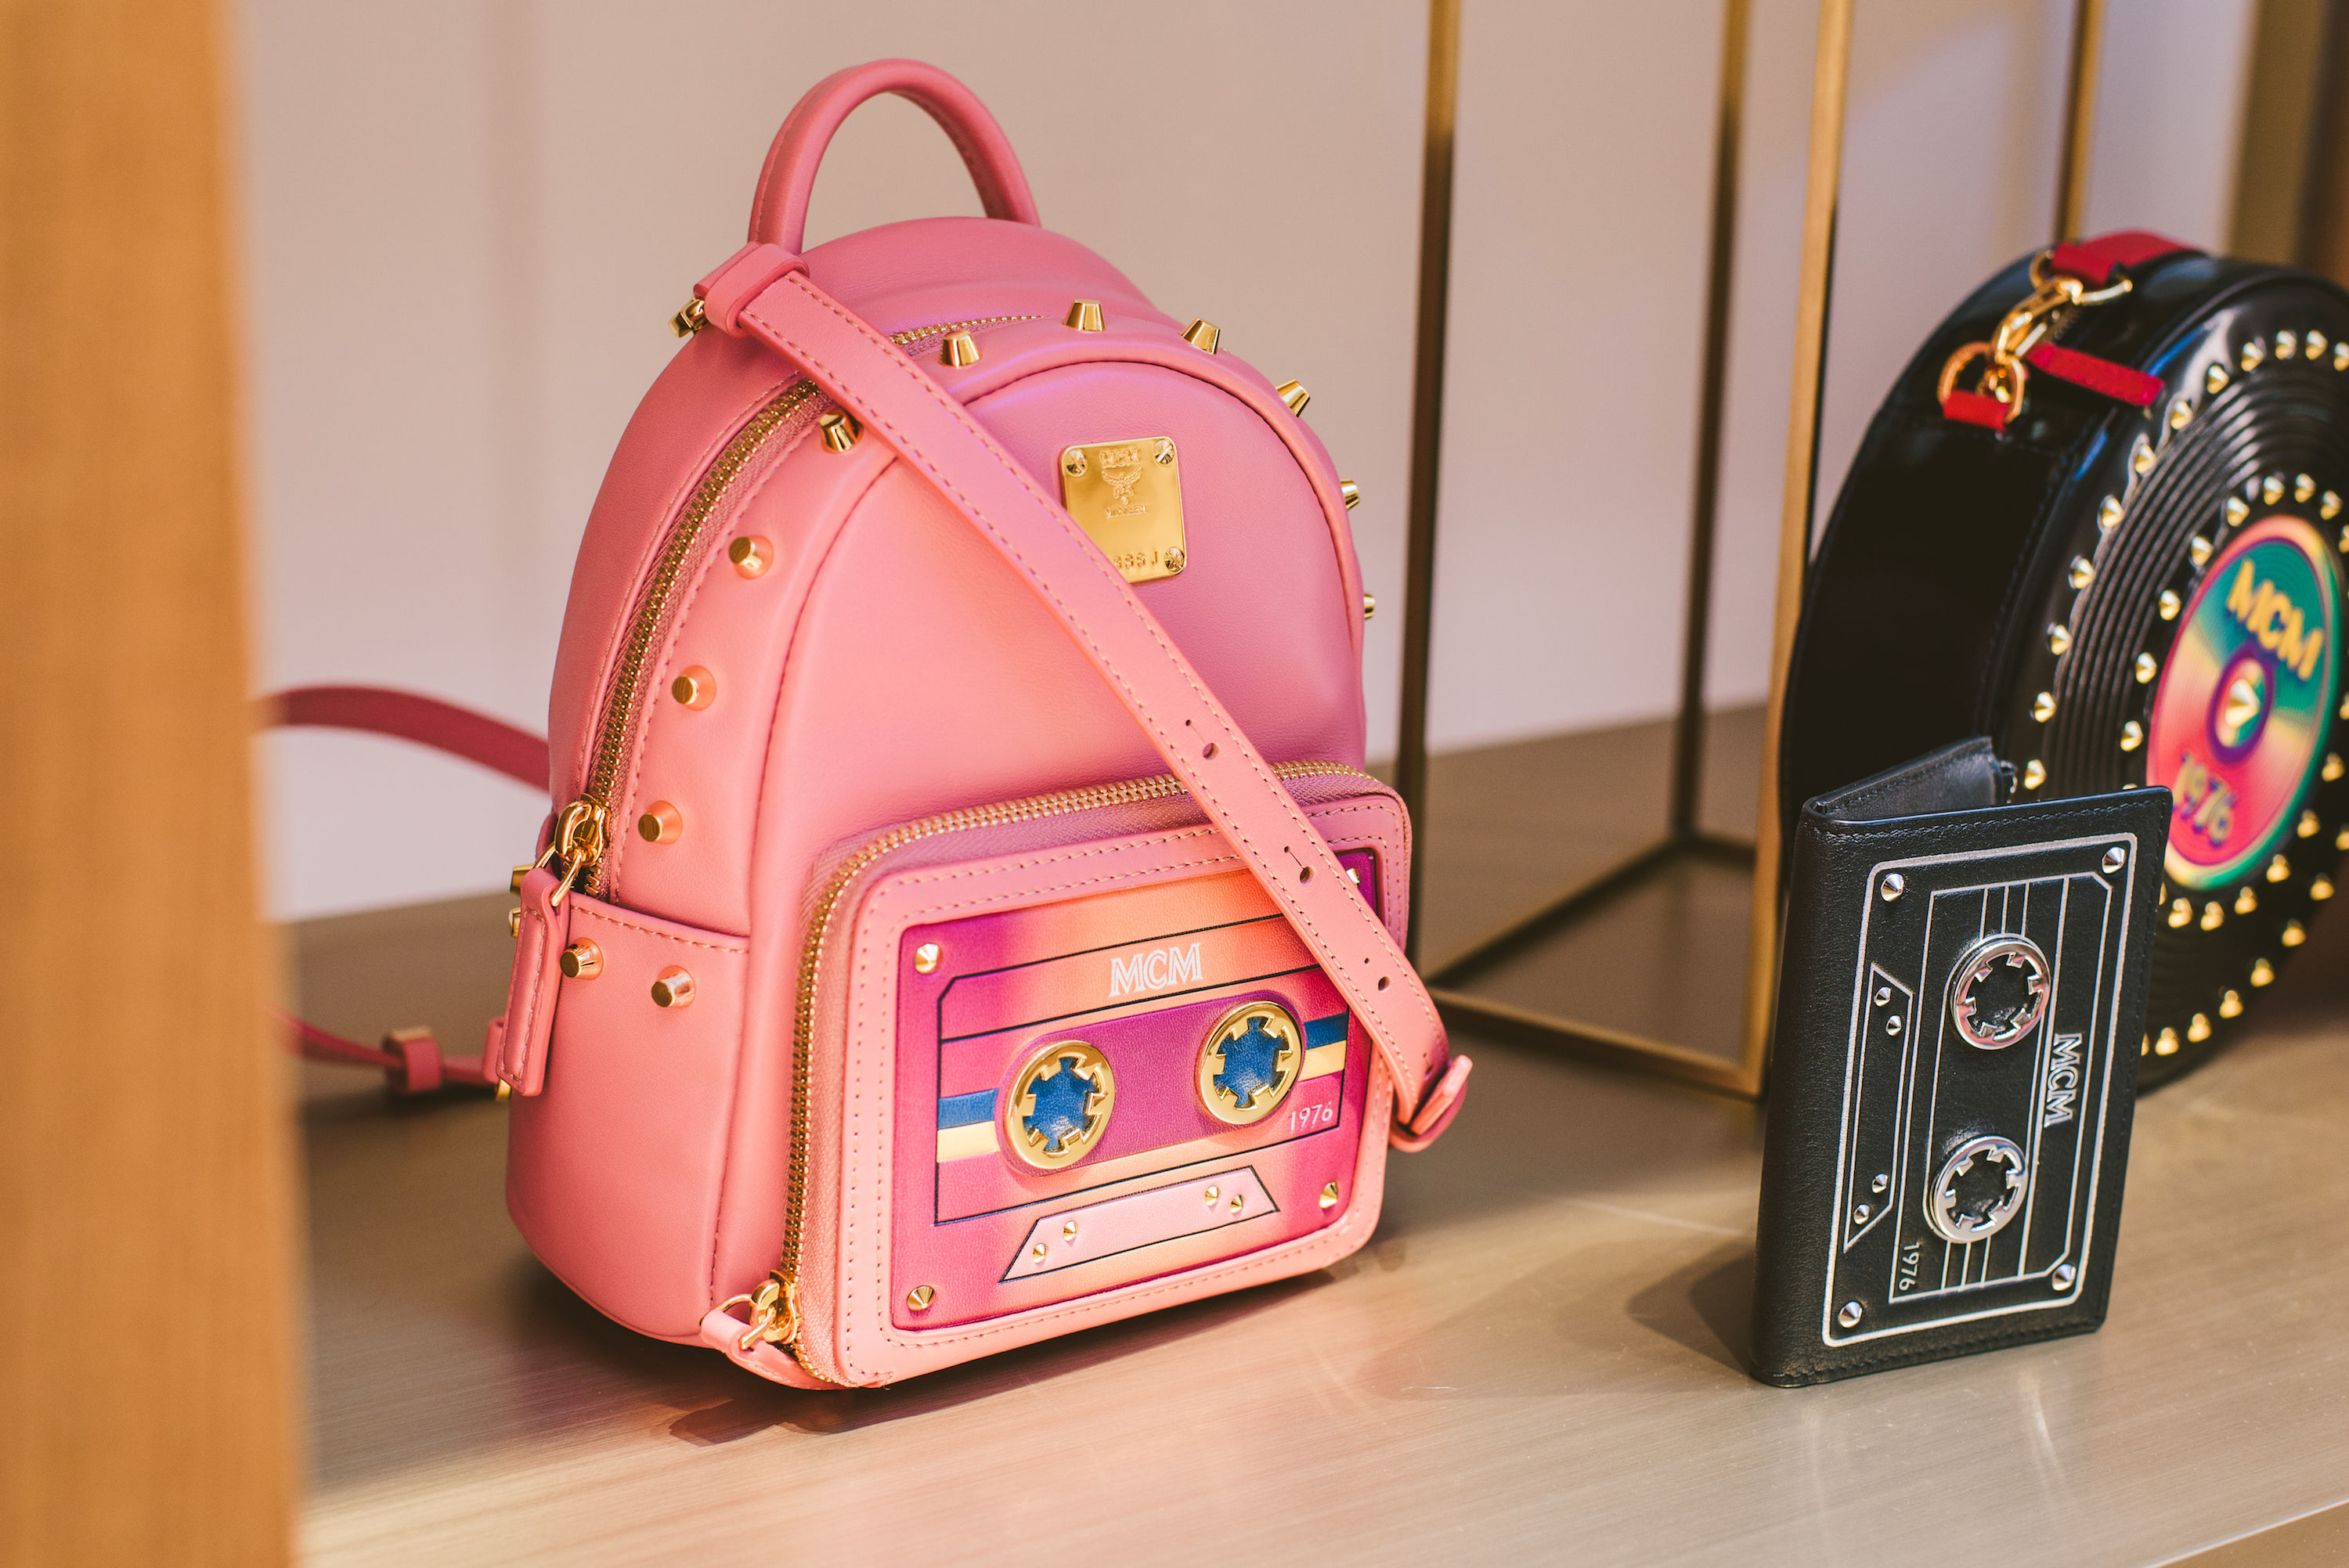 The Latest Bags From MCM Is Giving Us Some Seriously Good Vibes